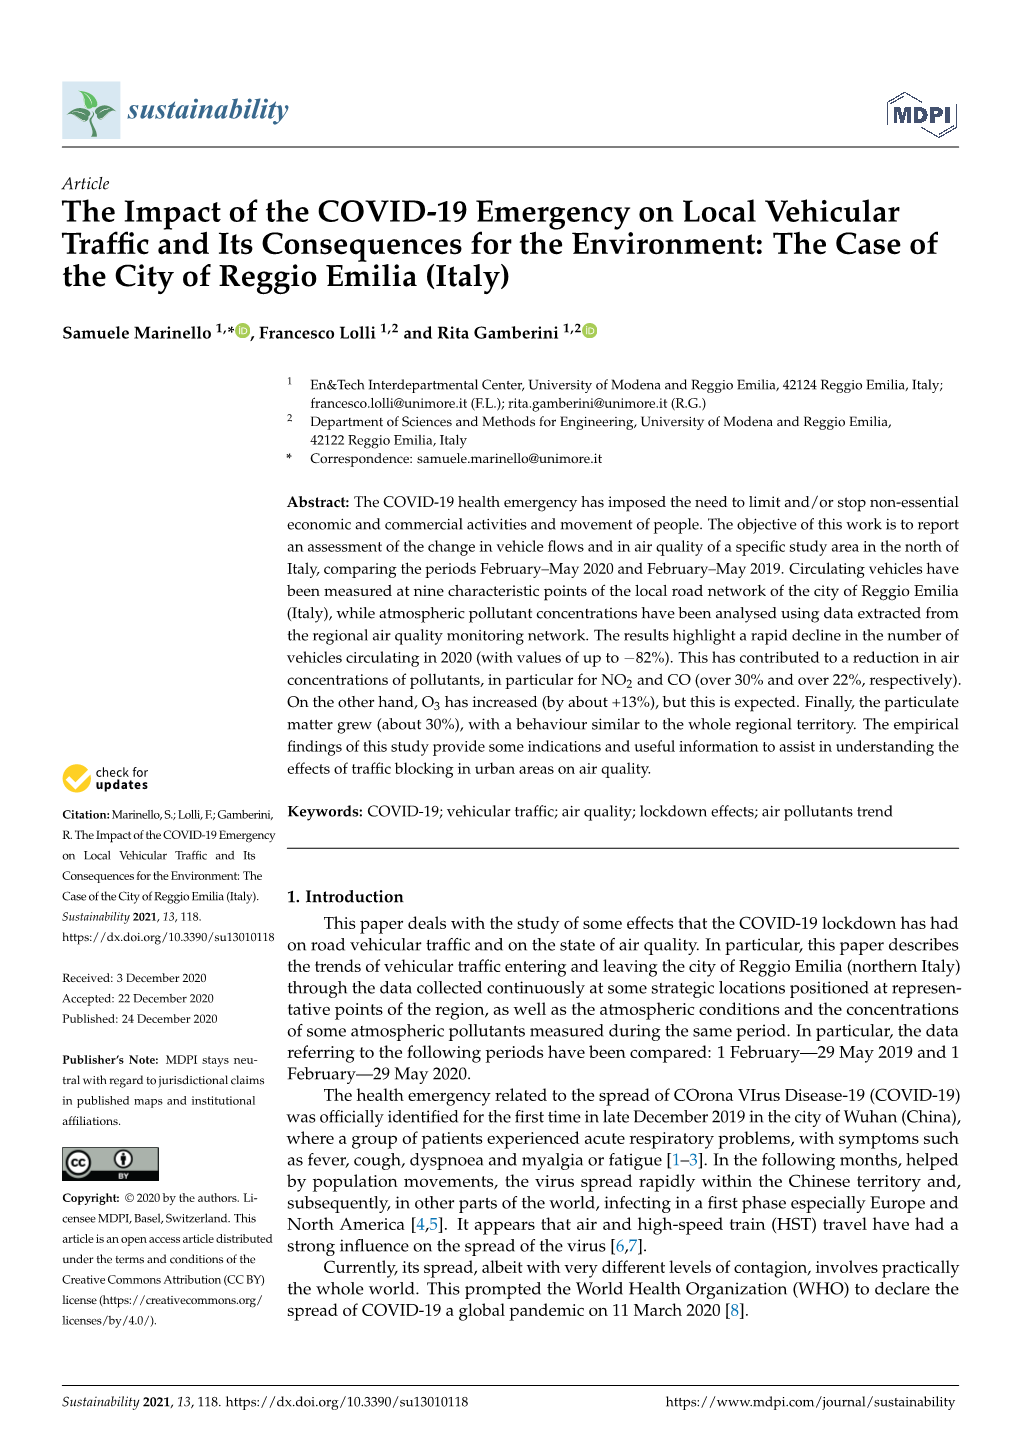 The Impact of the COVID-19 Emergency on Local Vehicular Trafﬁc and Its Consequences for the Environment: the Case of the City of Reggio Emilia (Italy)